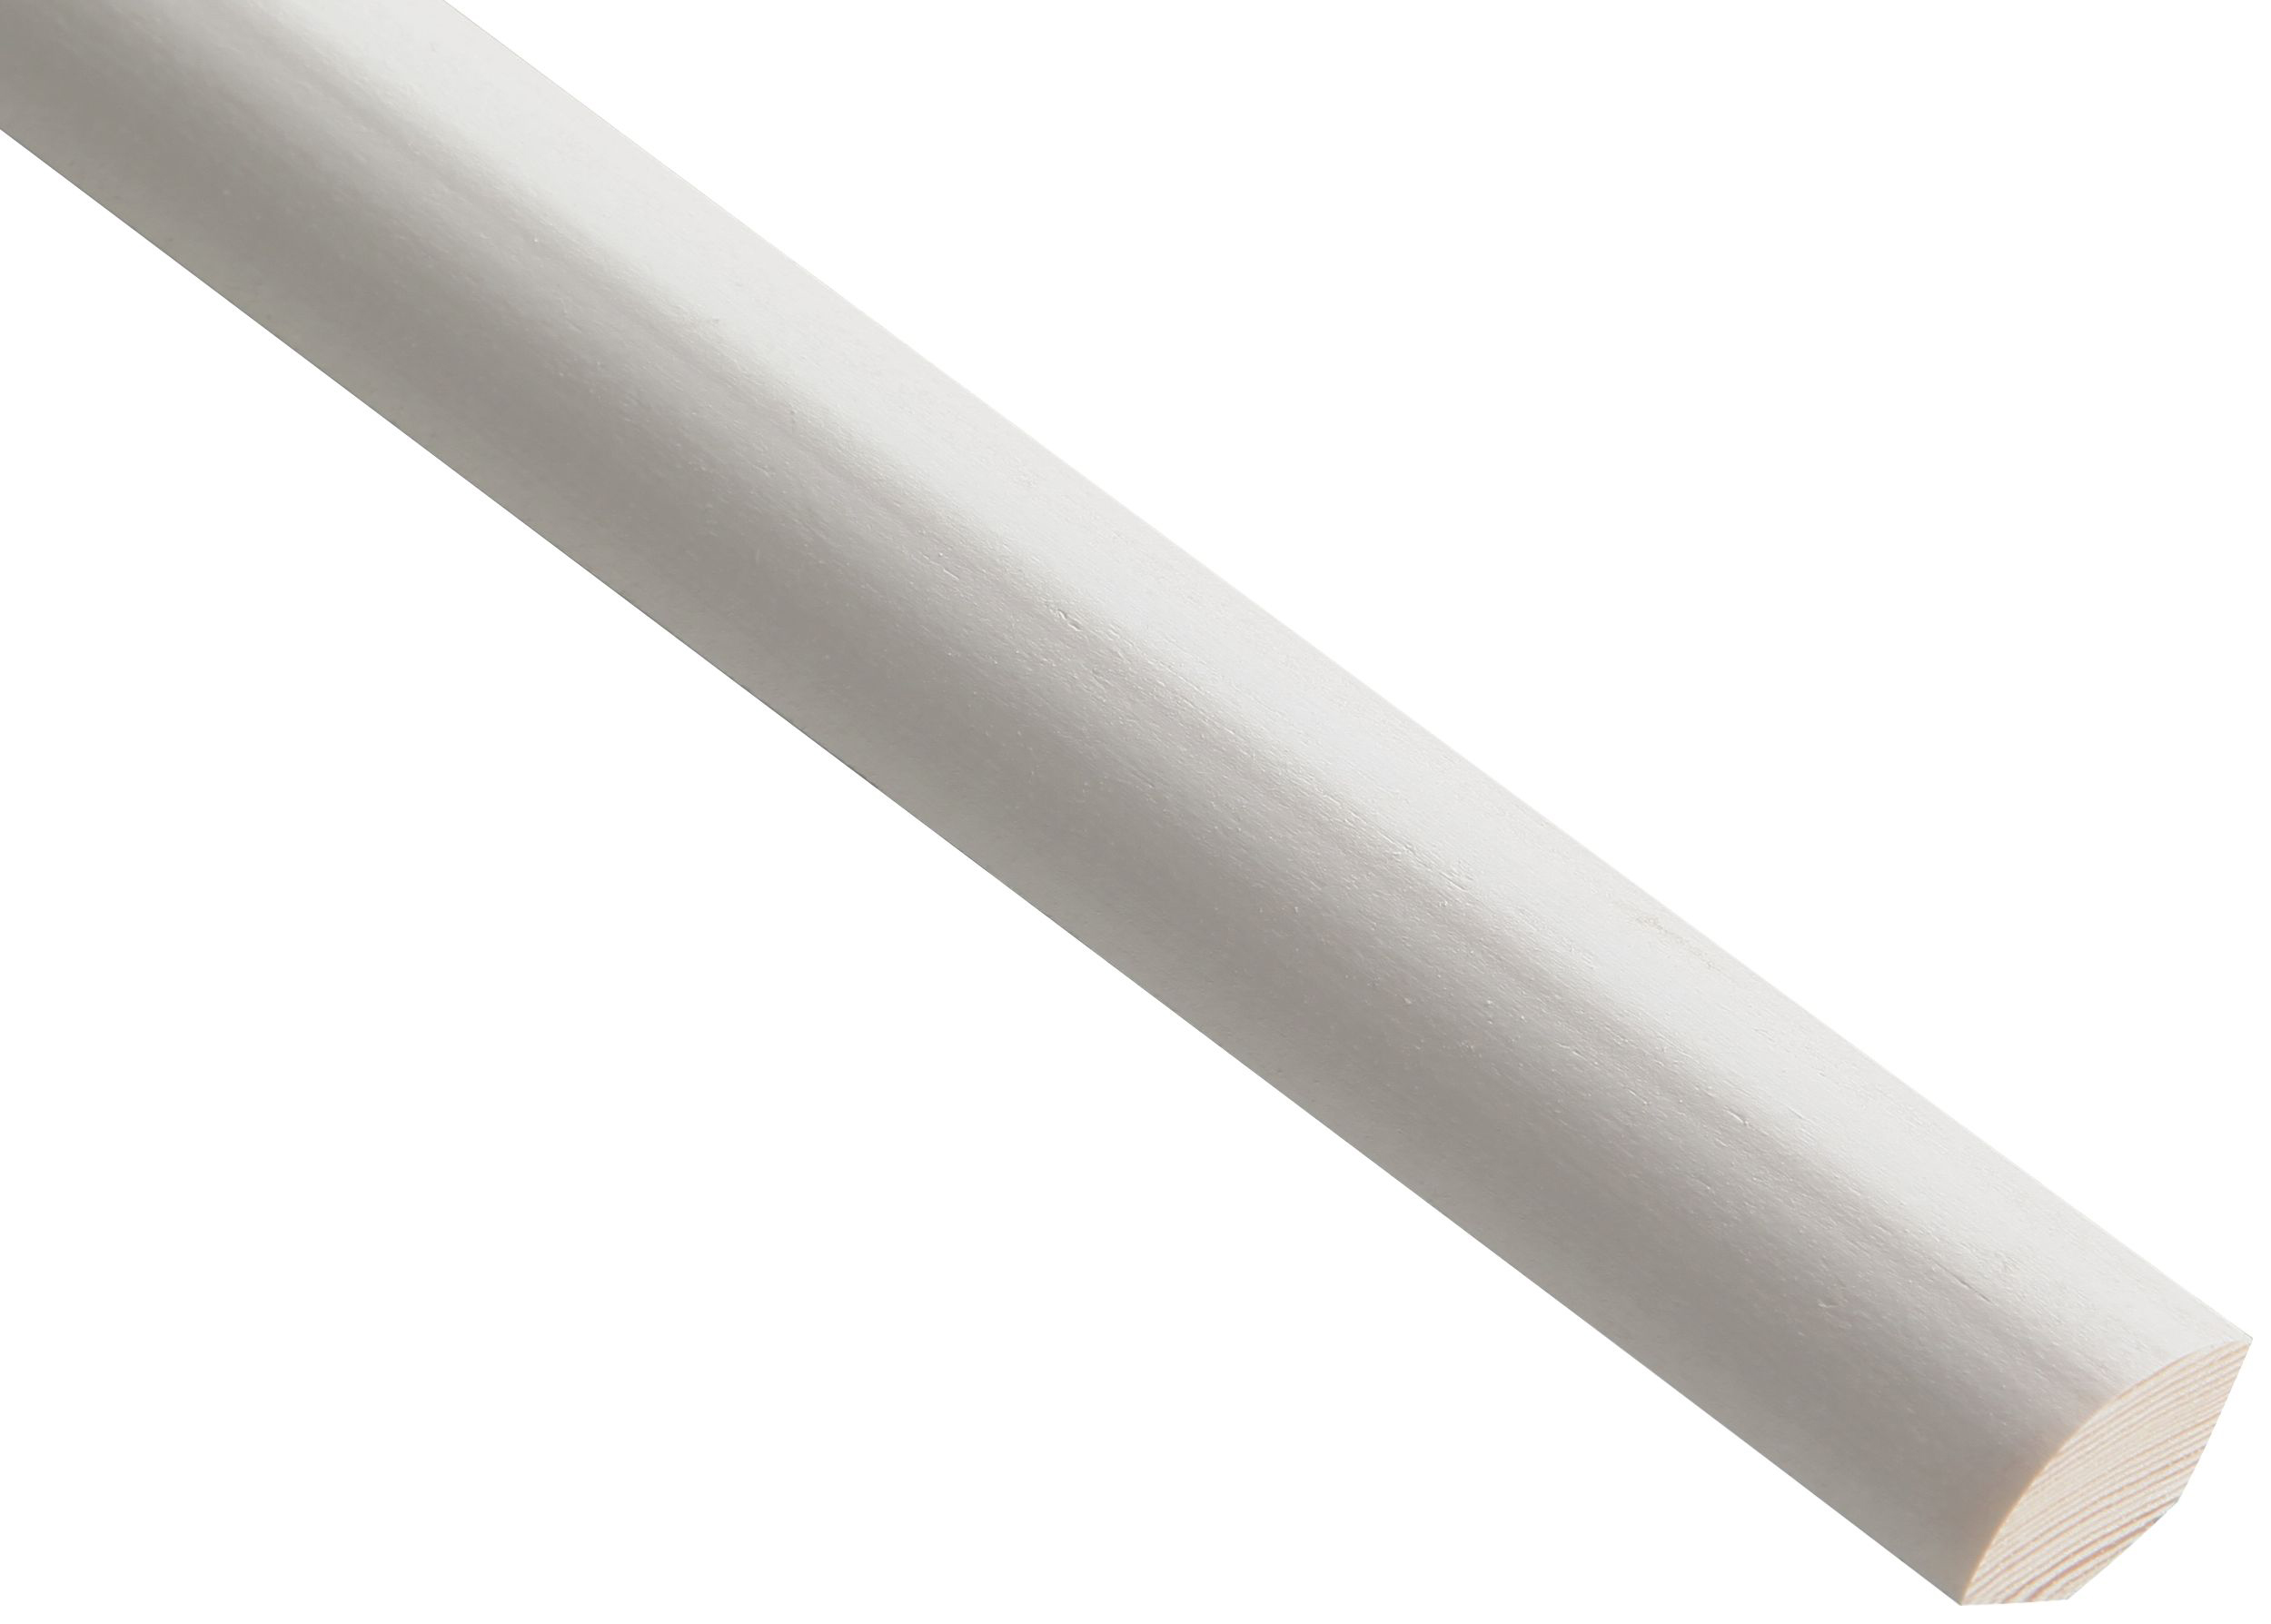 Image of Wickes Primed Quadrant Moulding - 15 x 15 x 2400mm